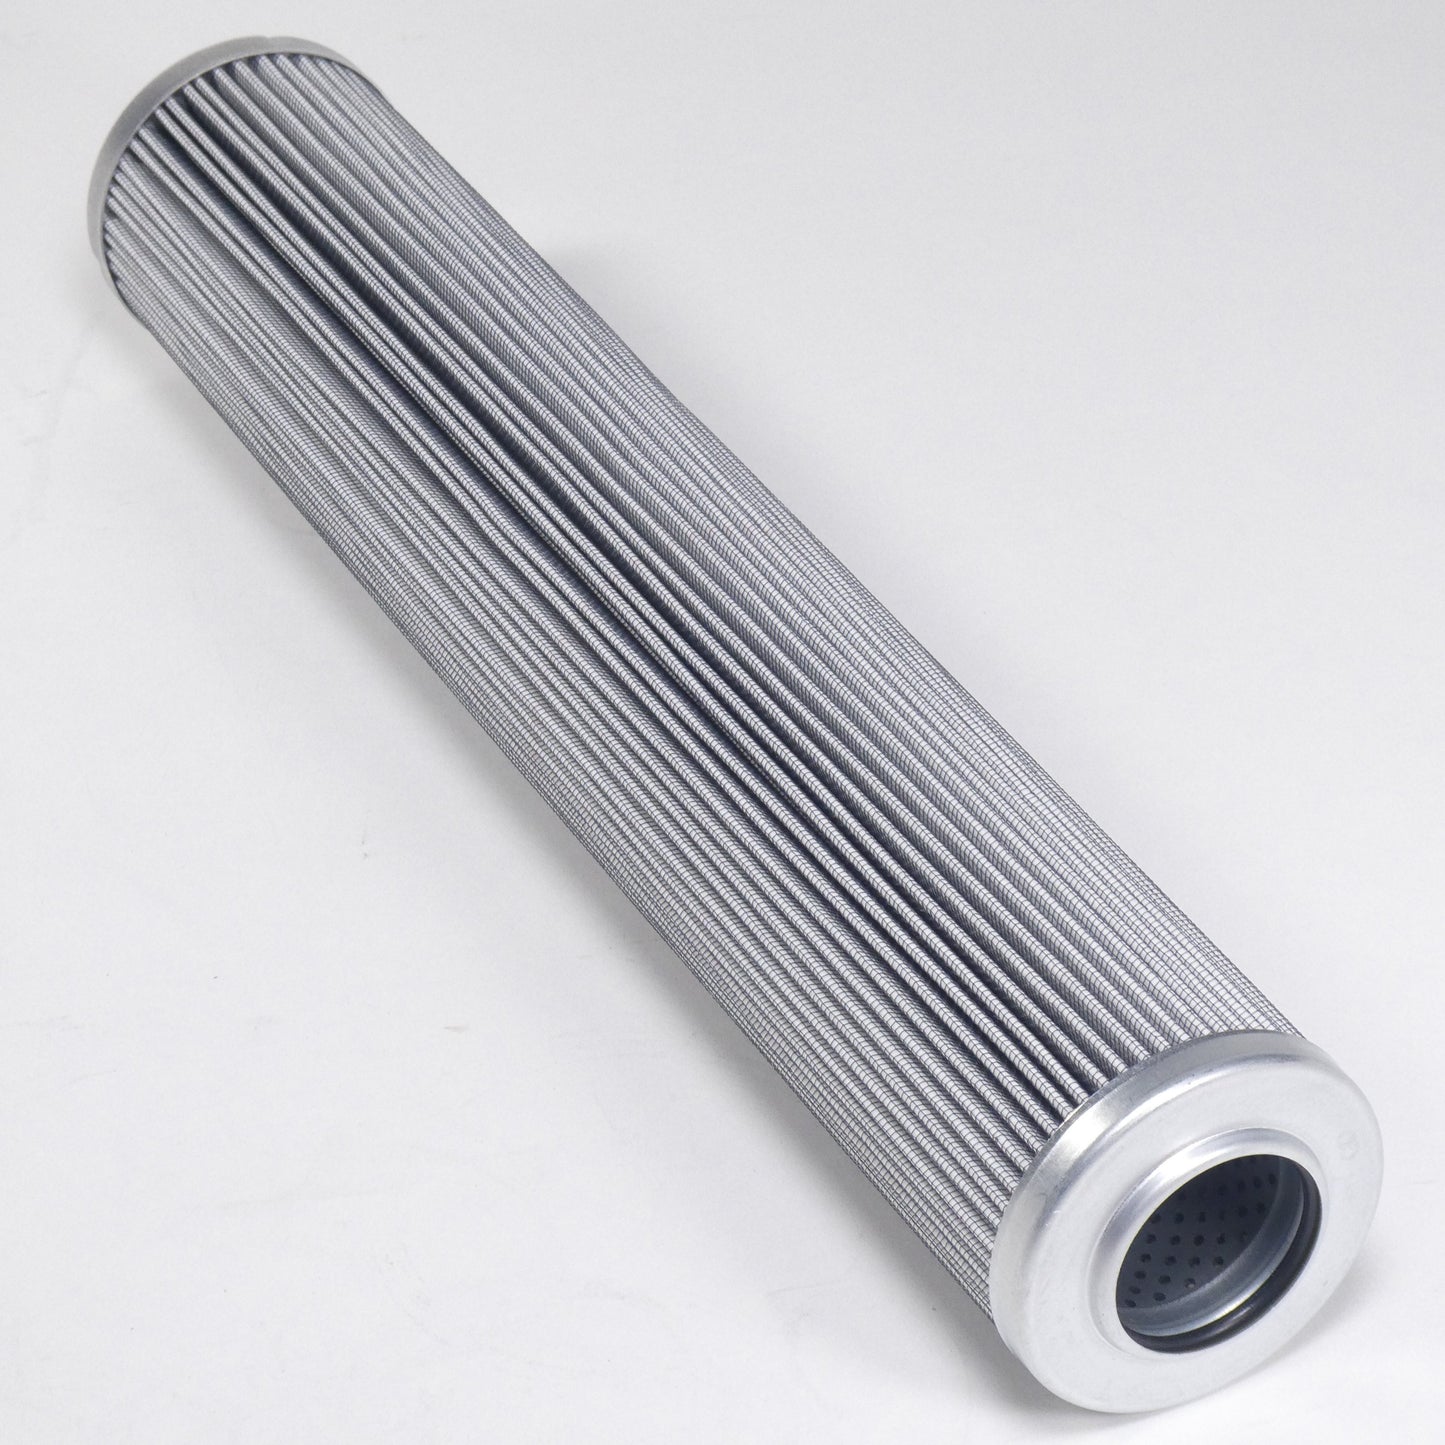 Hydrafil Replacement Filter Element for Western E6021V5C03